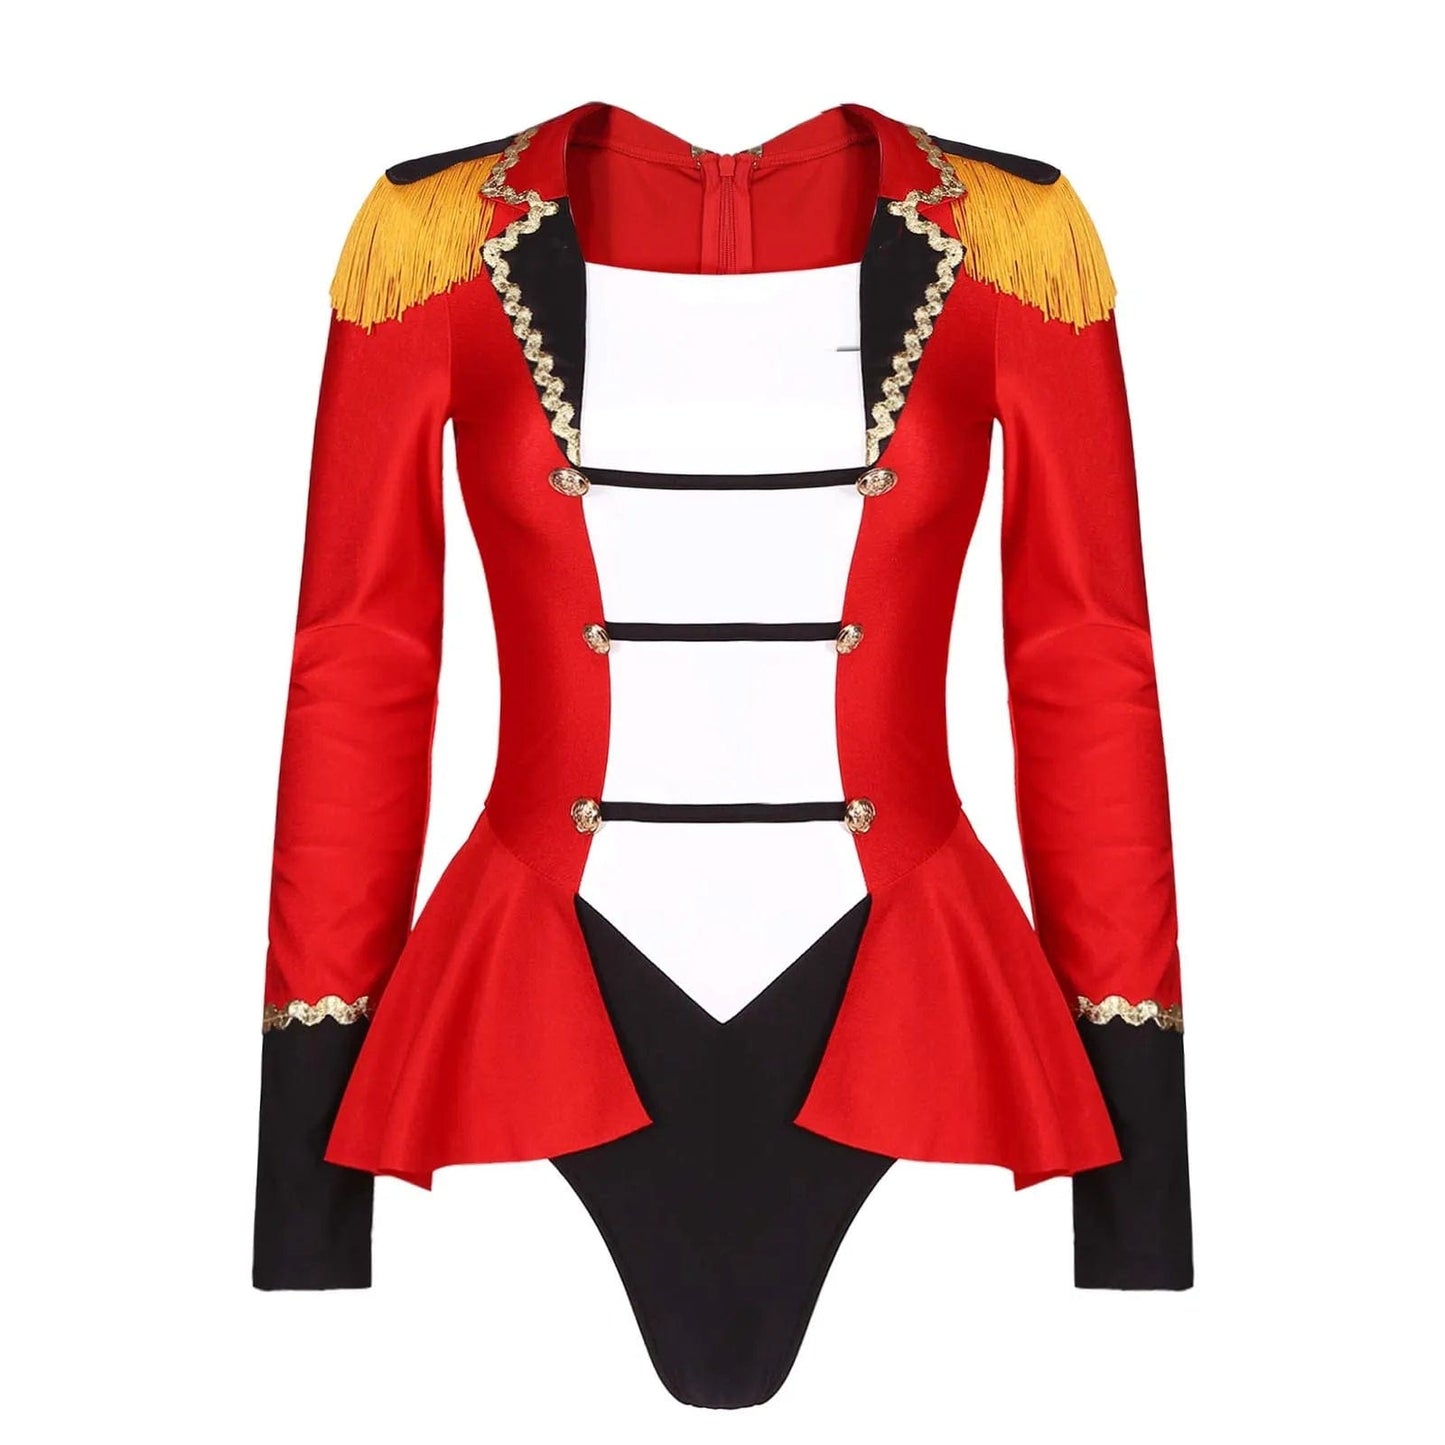 Kinky Cloth Red C / S Circus Ringmaster Outfit Costumes